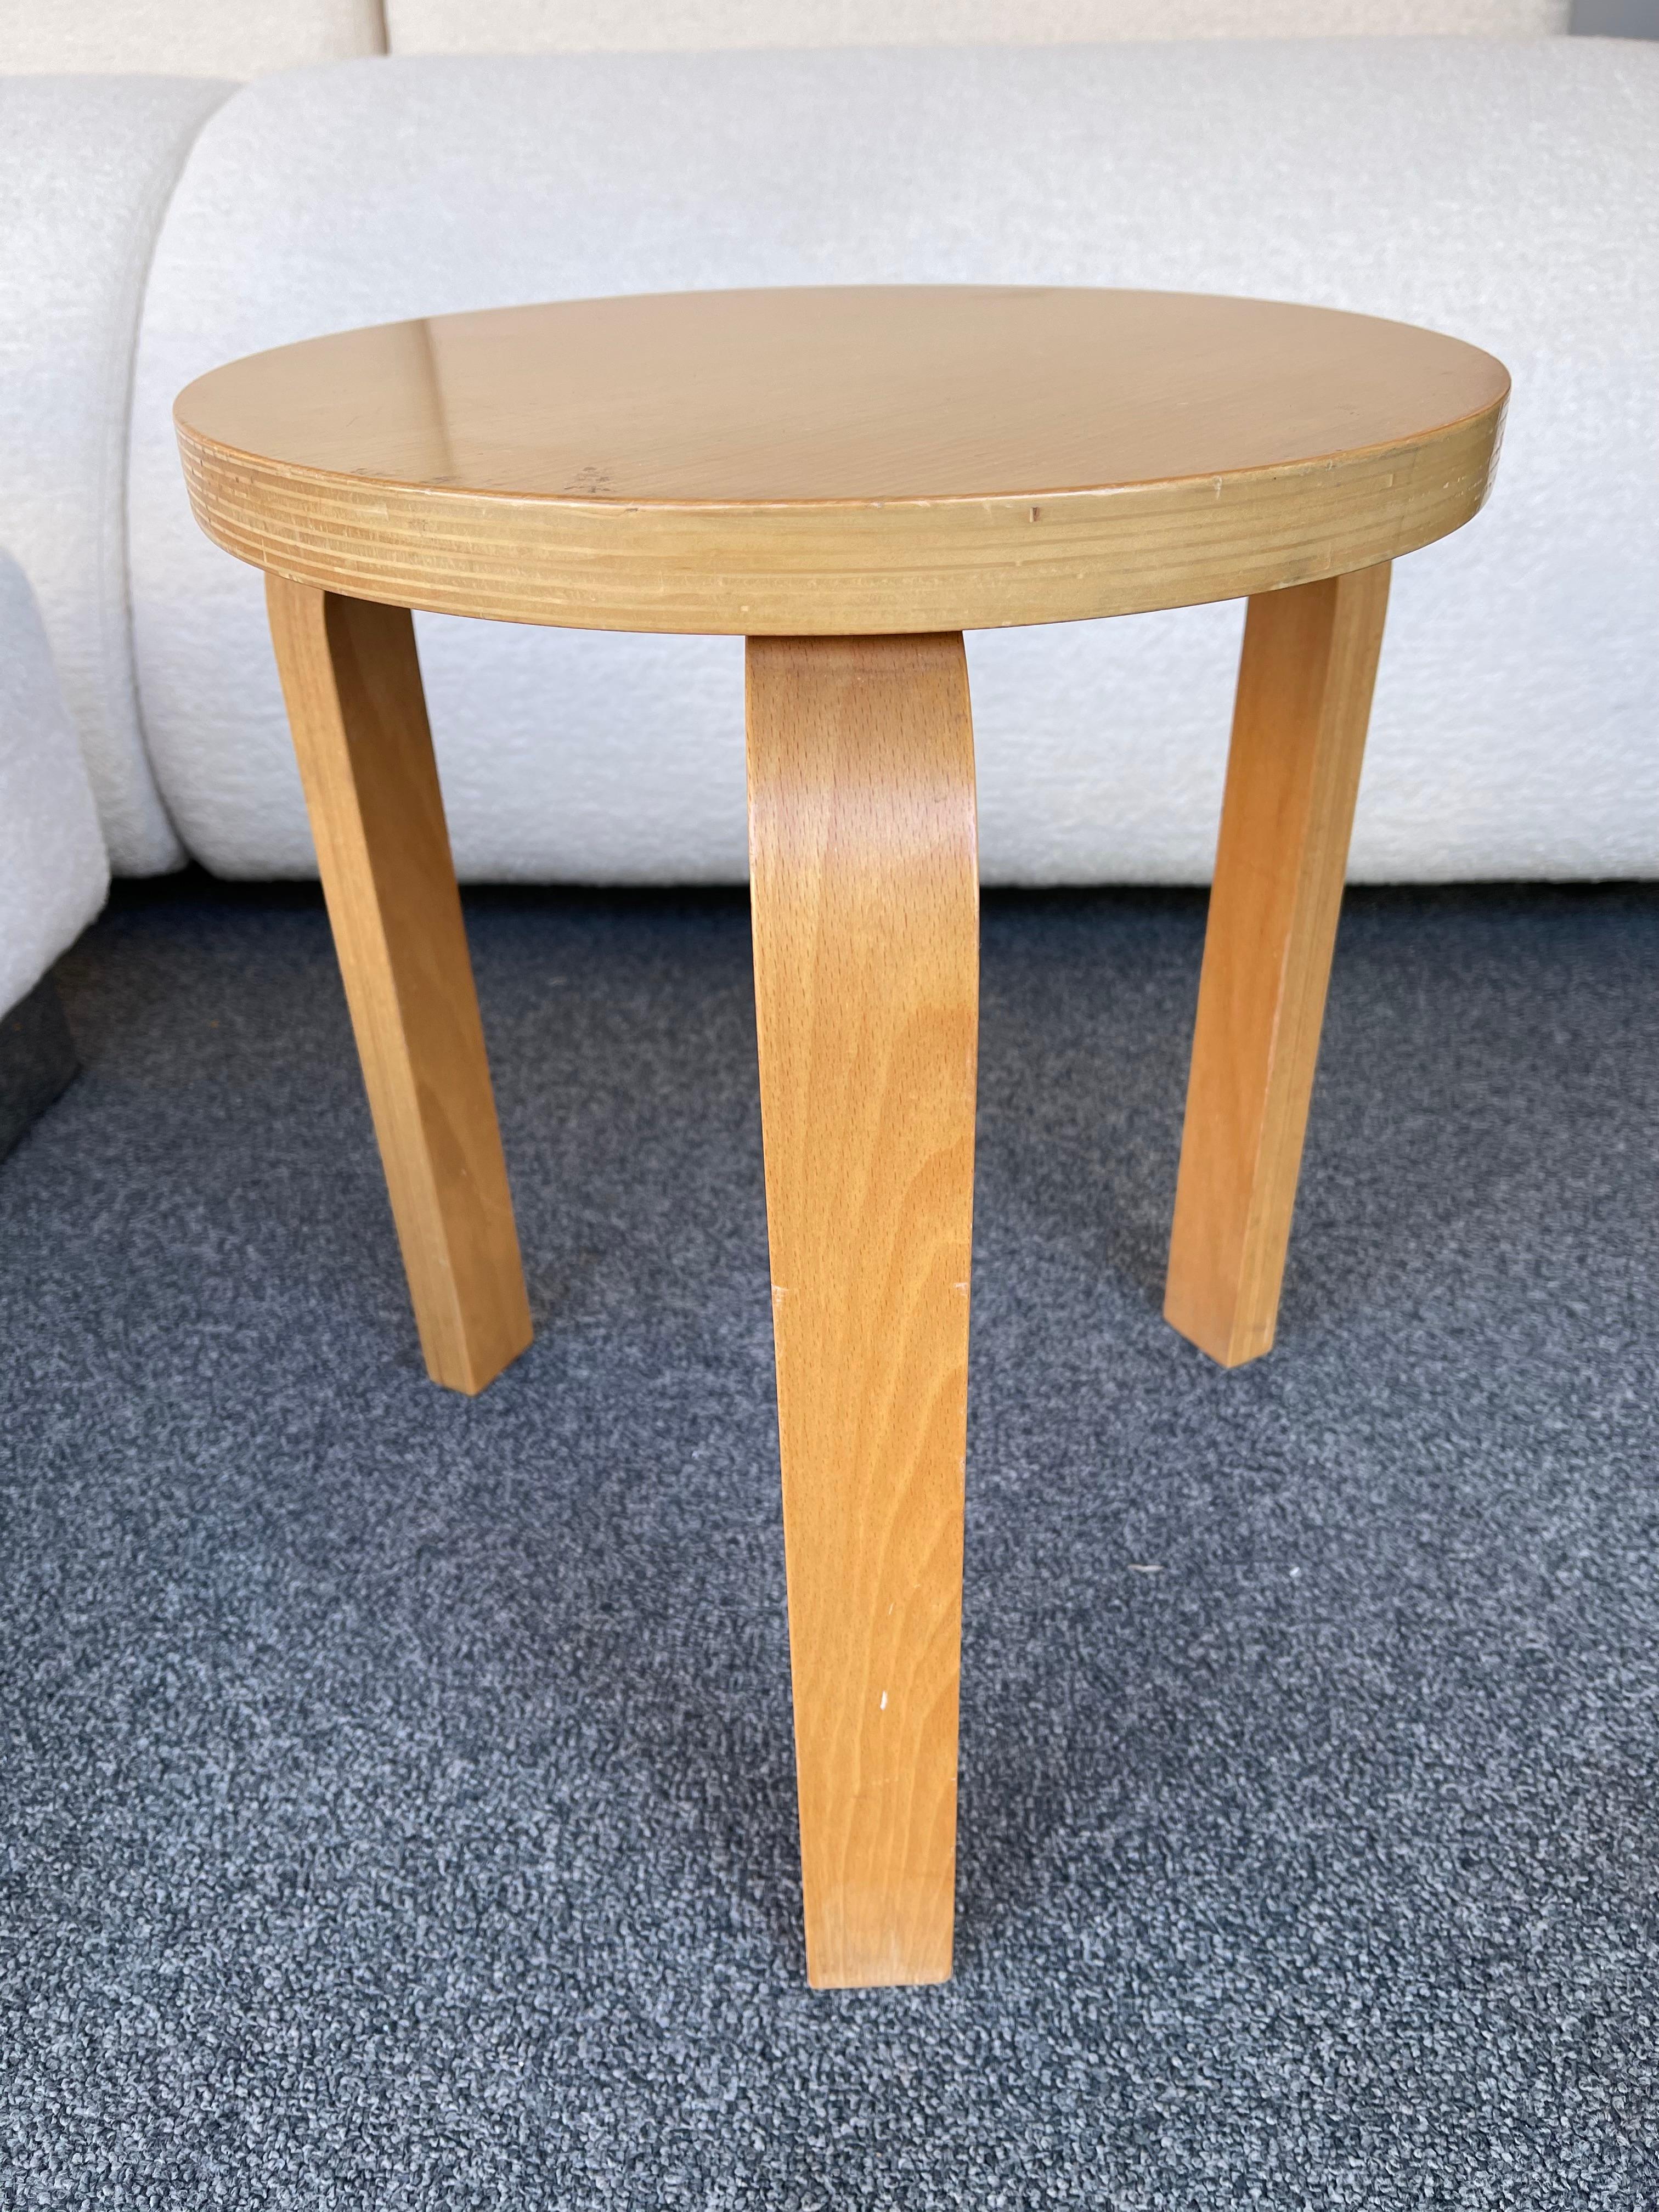 Wood birch stool or side table model 60 by Alvar Aalto, an old Artek edition produced and acquired by previous owner during the 1970s. Designed by Alvar Aalto in 1933.